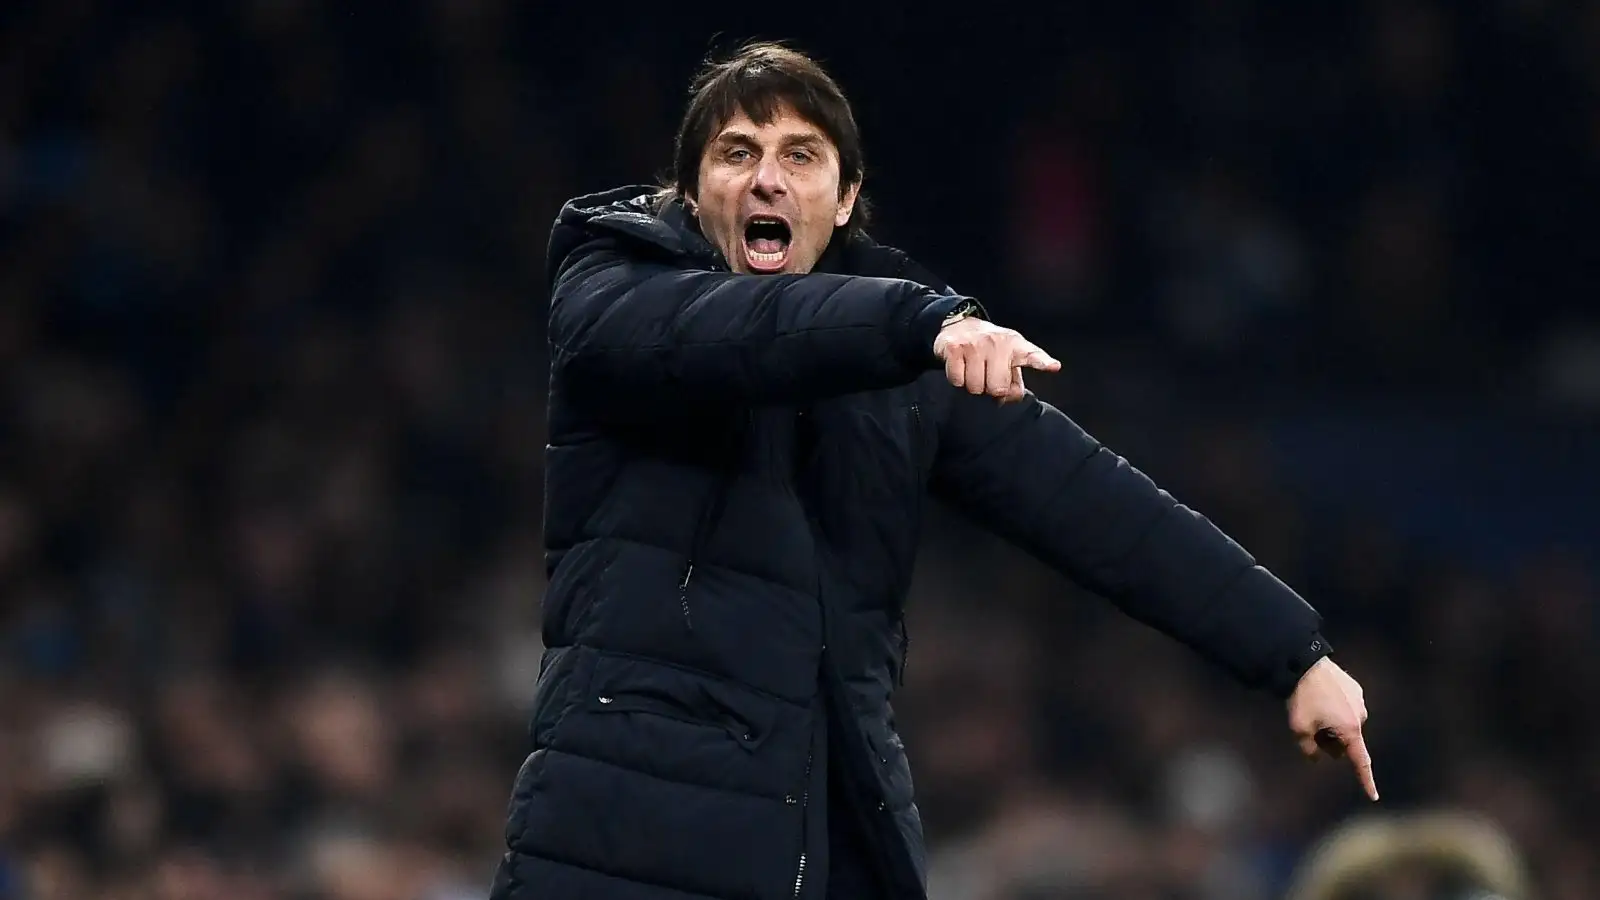 Tottenham boss Antonio Conte points and shouts instructions